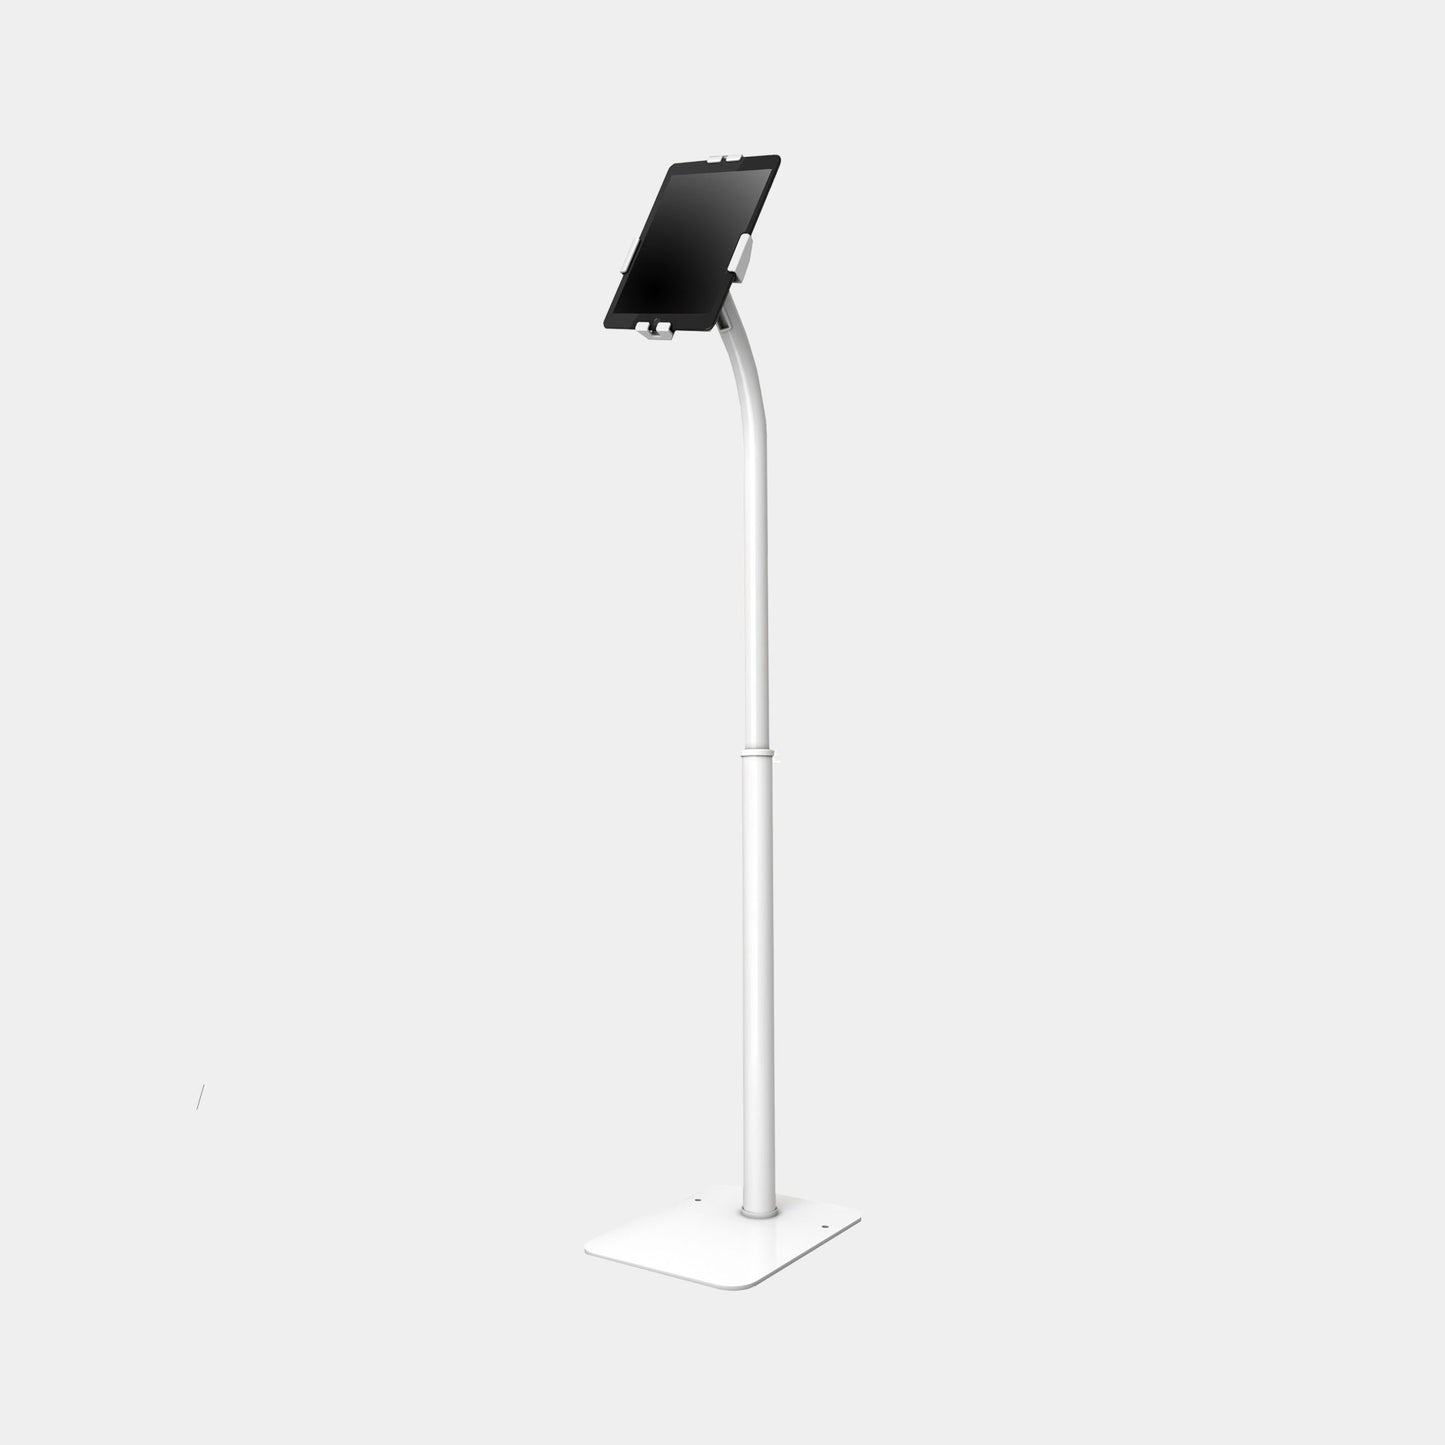 Technomounts Anti-theft Floor Stand for Tablets - Adjustable Height - Universal Enclosure for 7.9" to 11"tablets. Flexible Tablet Rotation and Tilt Angles